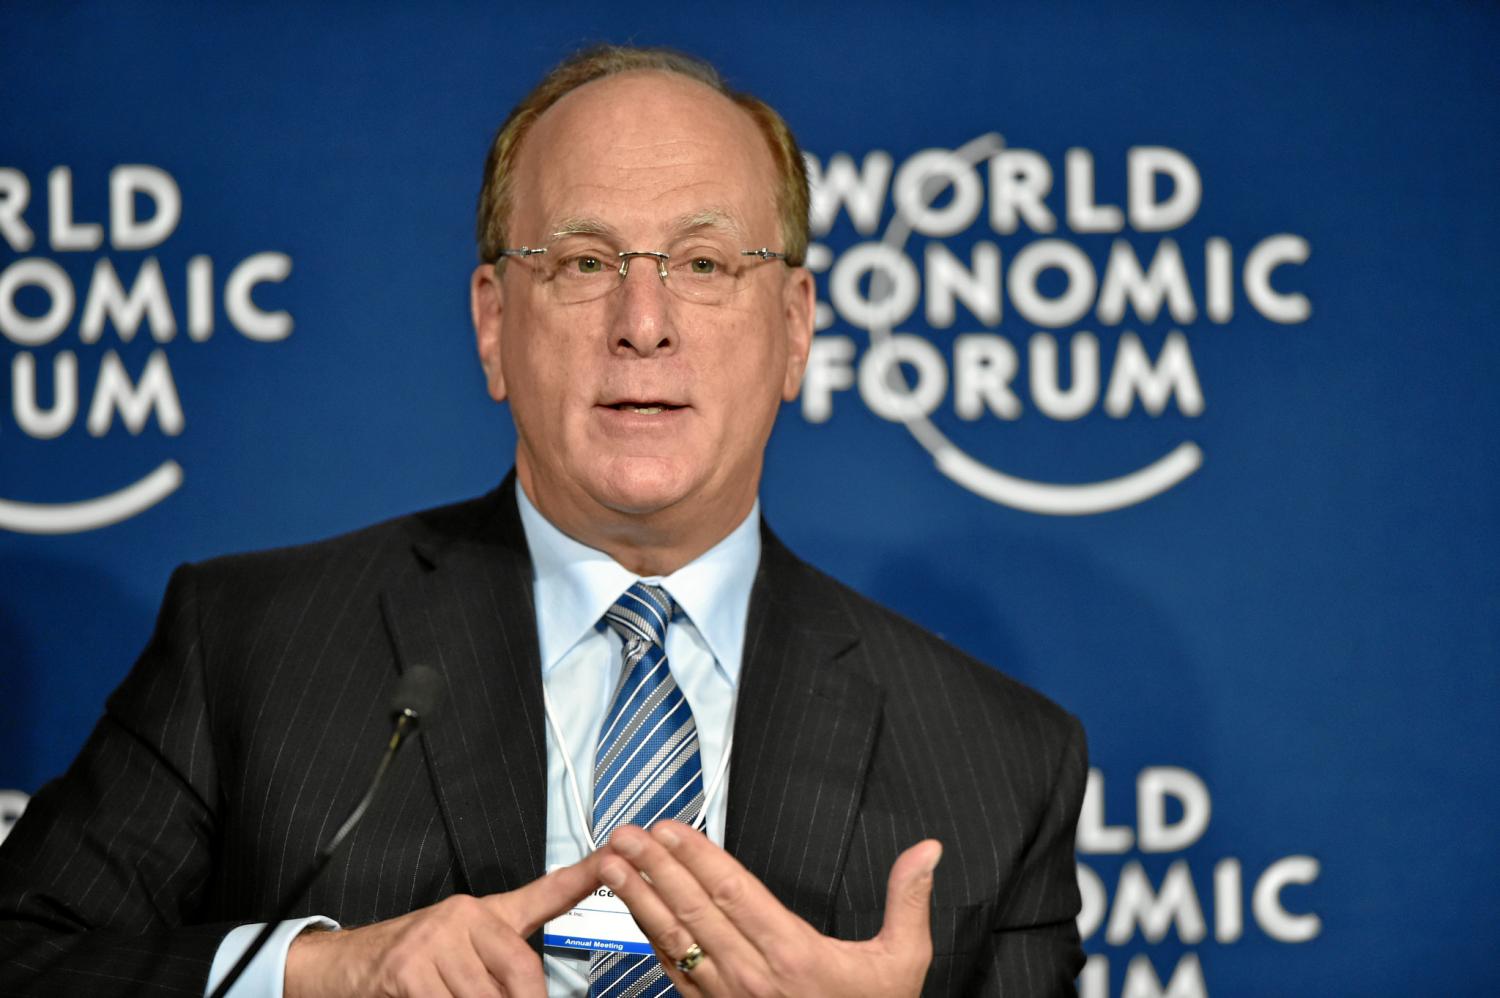 Is Larry Fink’s Latest Letter Enough to Move the Needle?